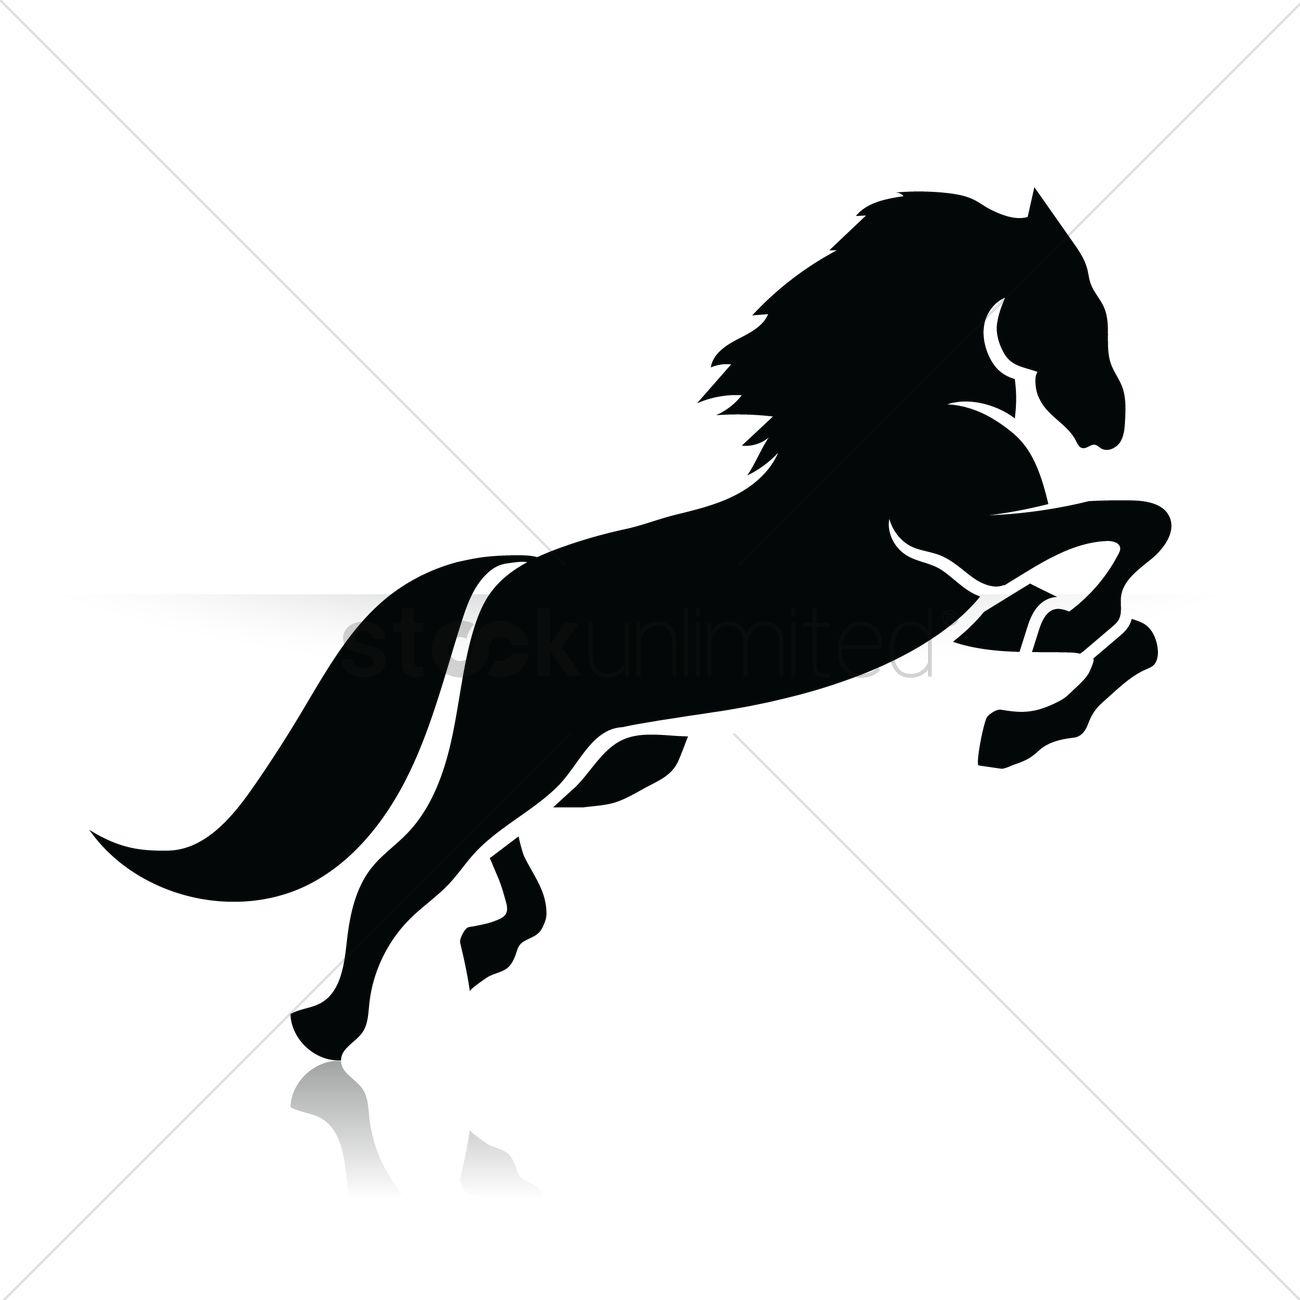 Horse Jumping Vector Logo - Silhouette of horse jumping Vector Image - 1438004 | StockUnlimited